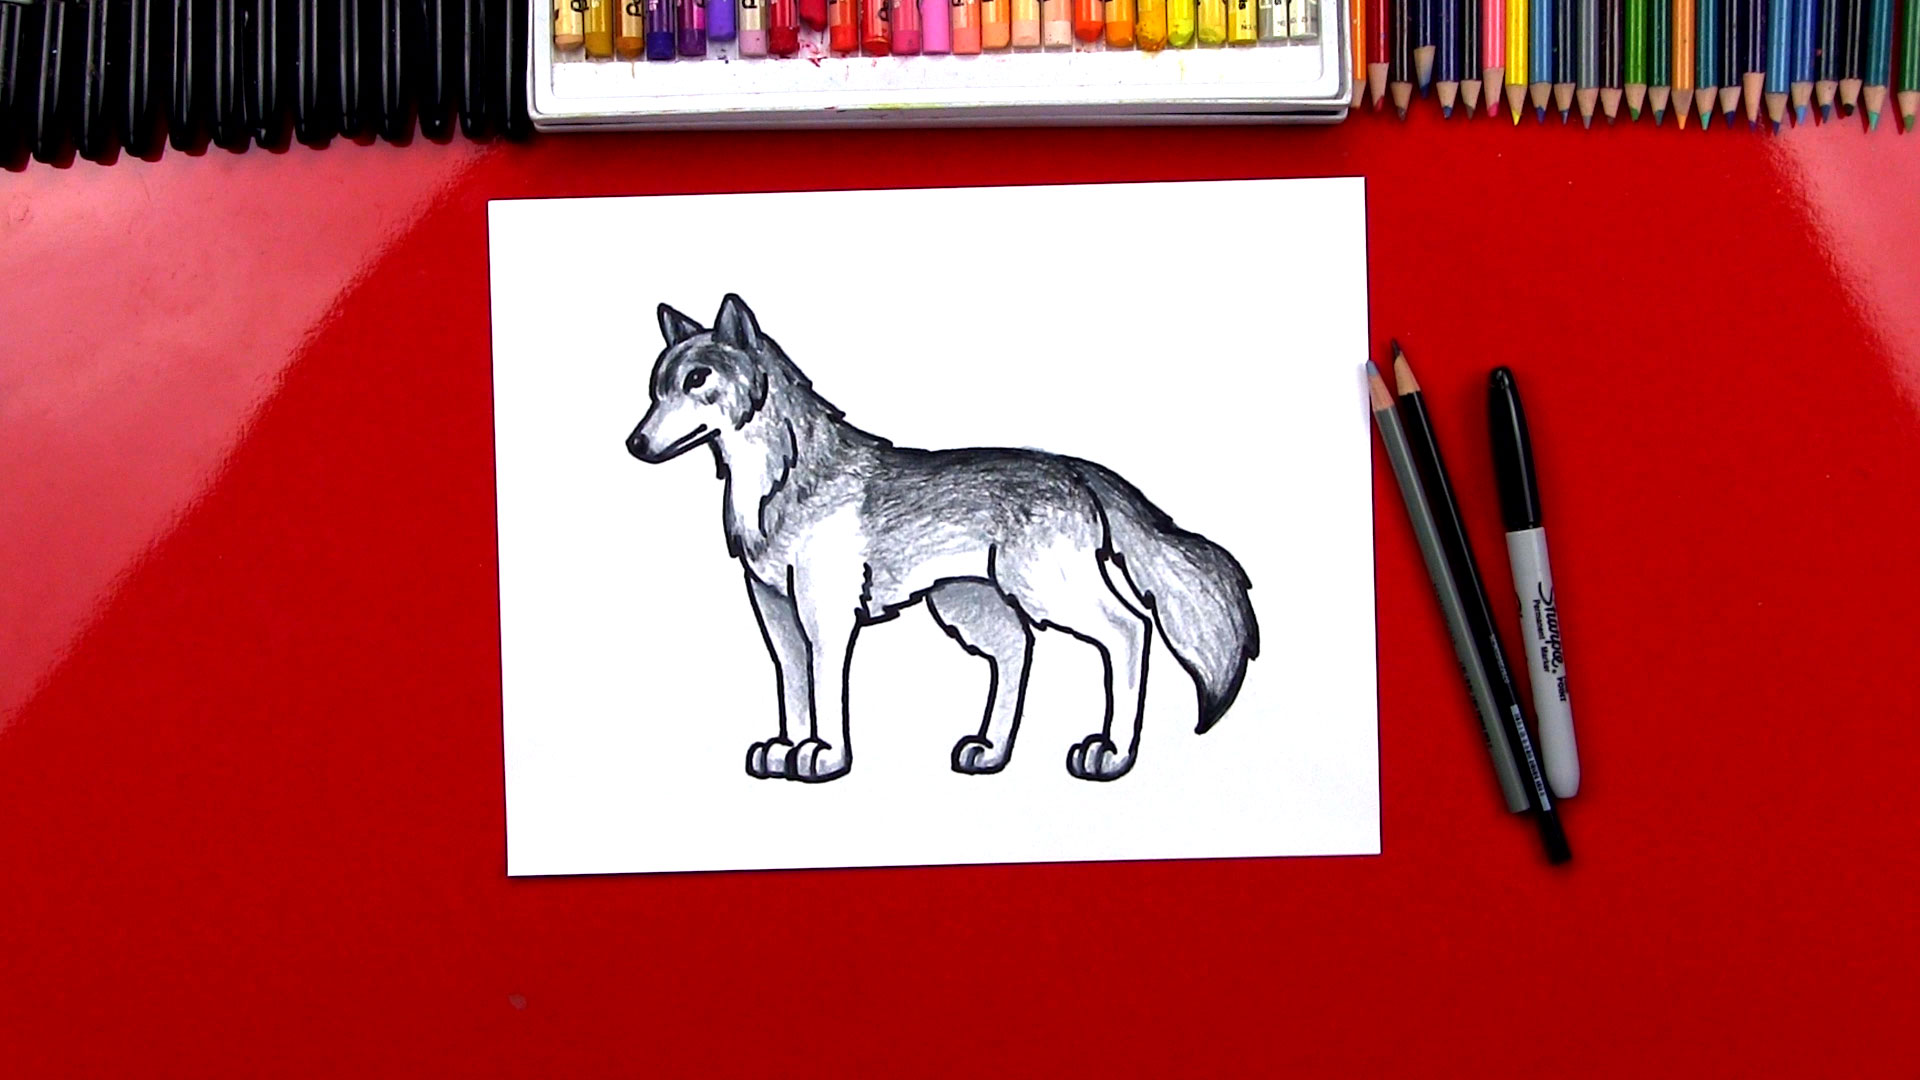 Wolf Speed Drawing - Art For Kids Hub 